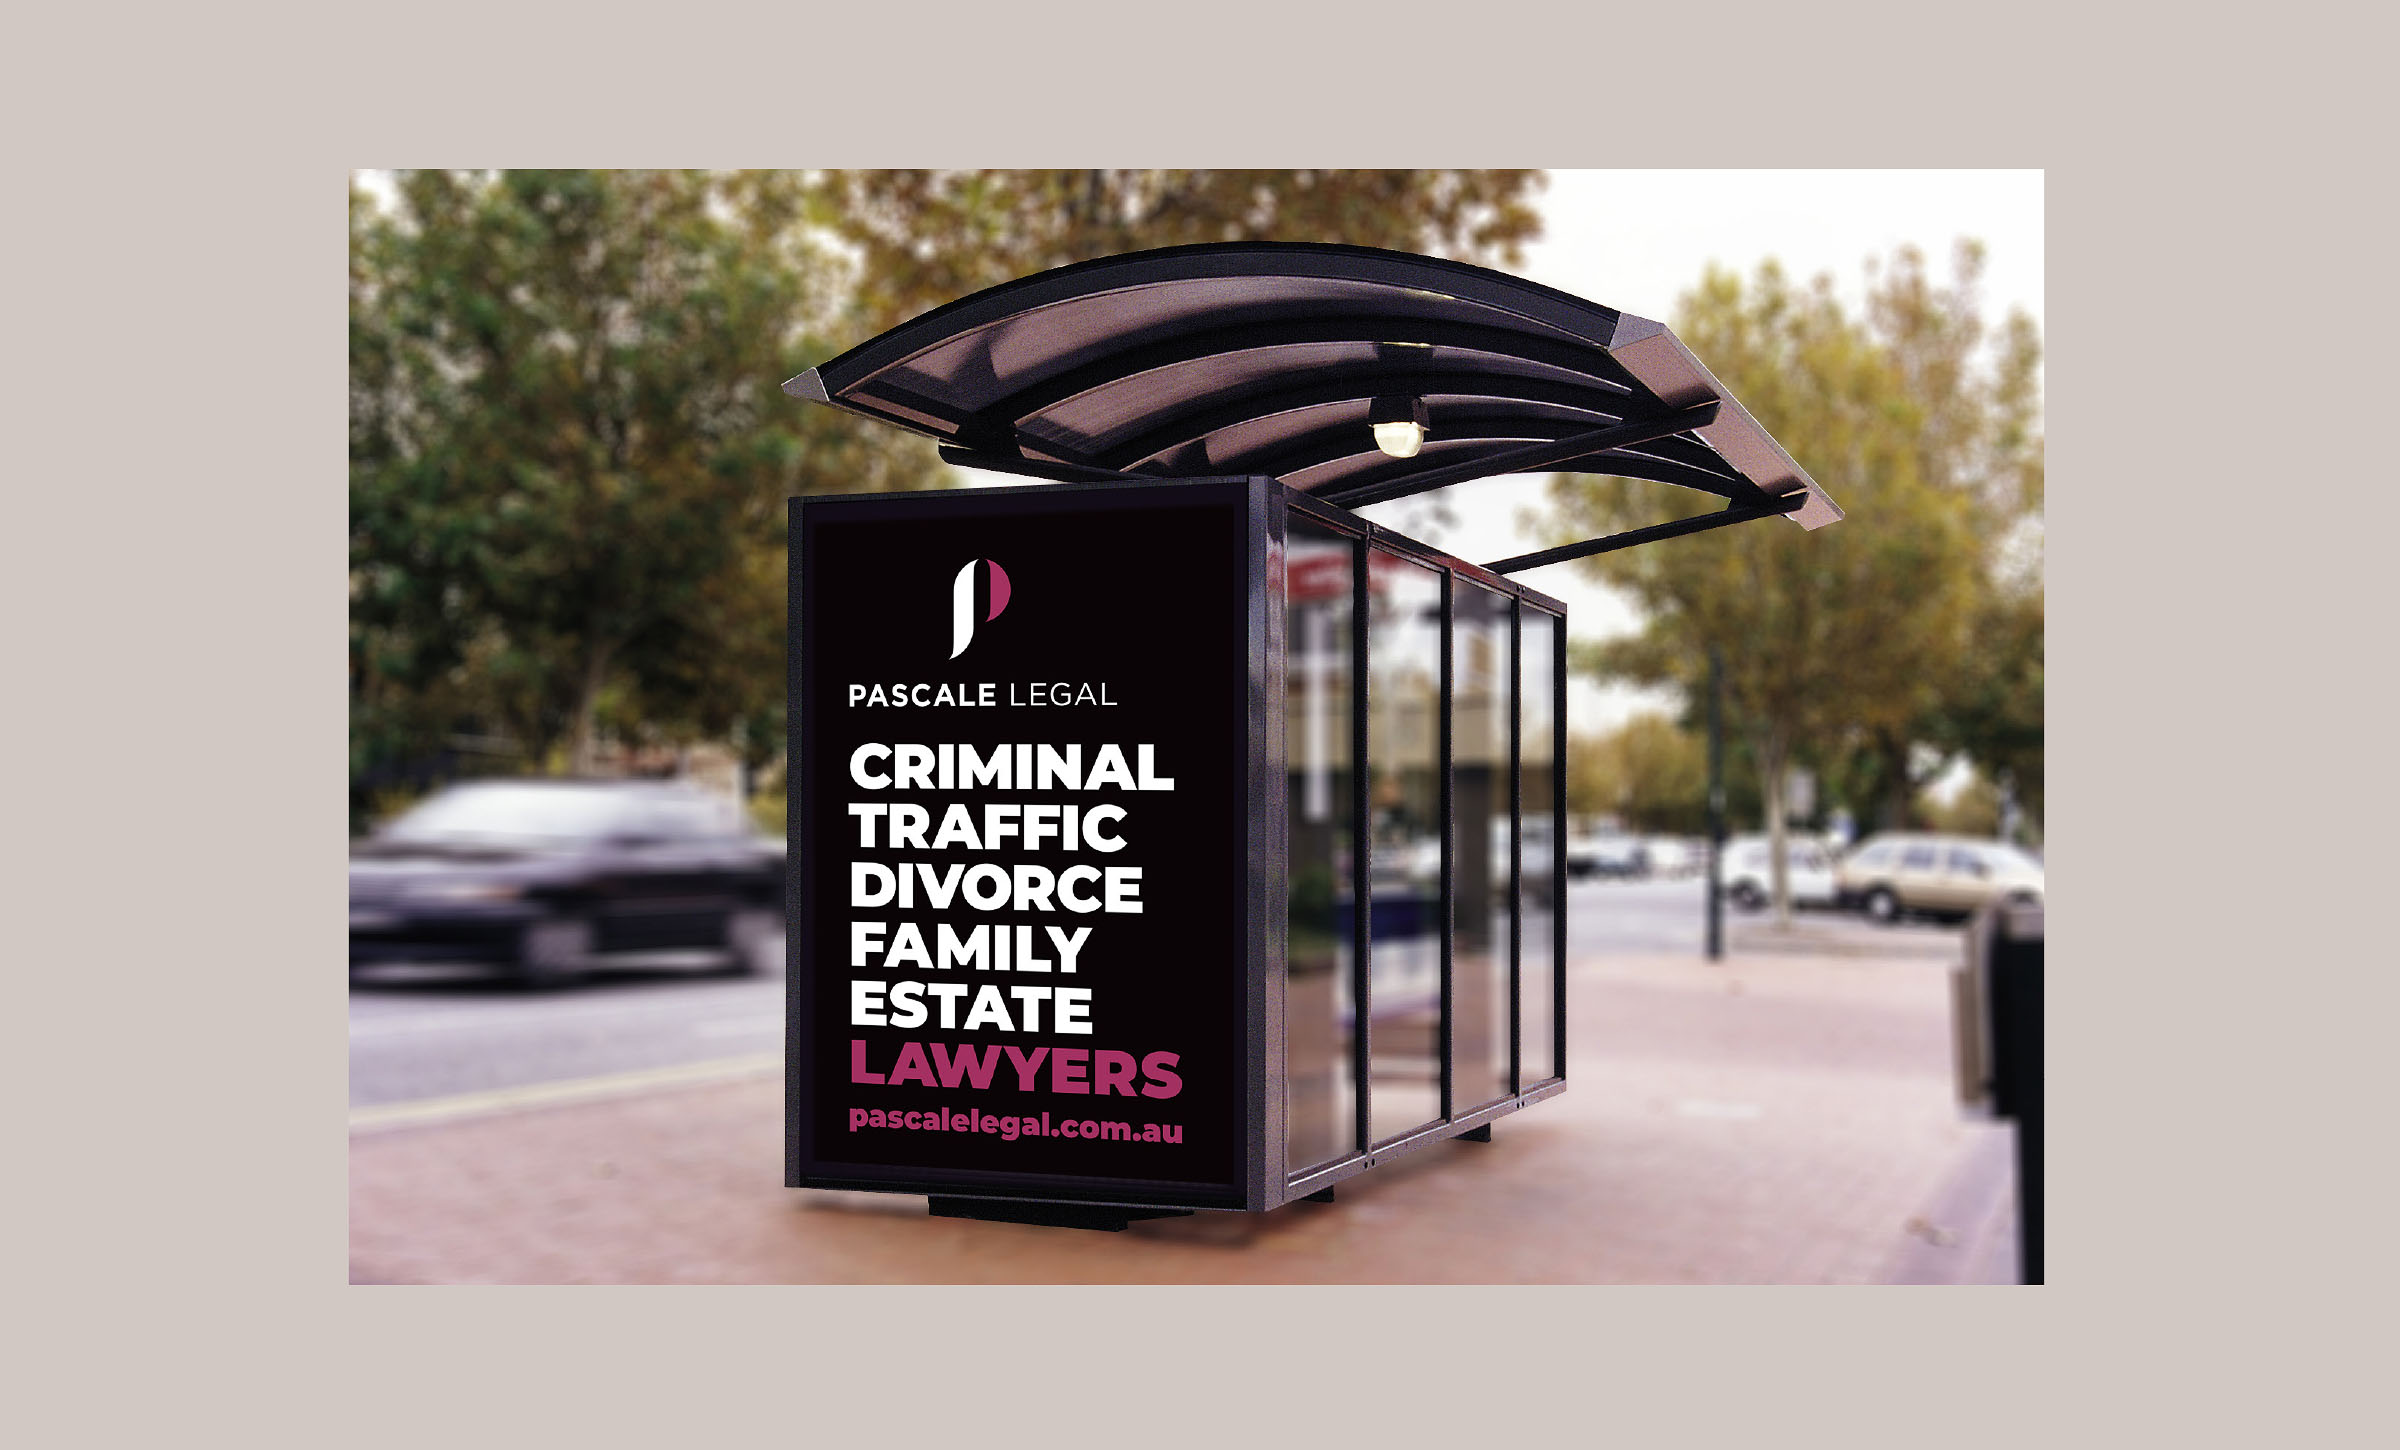 Pascale Legal Bus Shelter Advertising Campaign